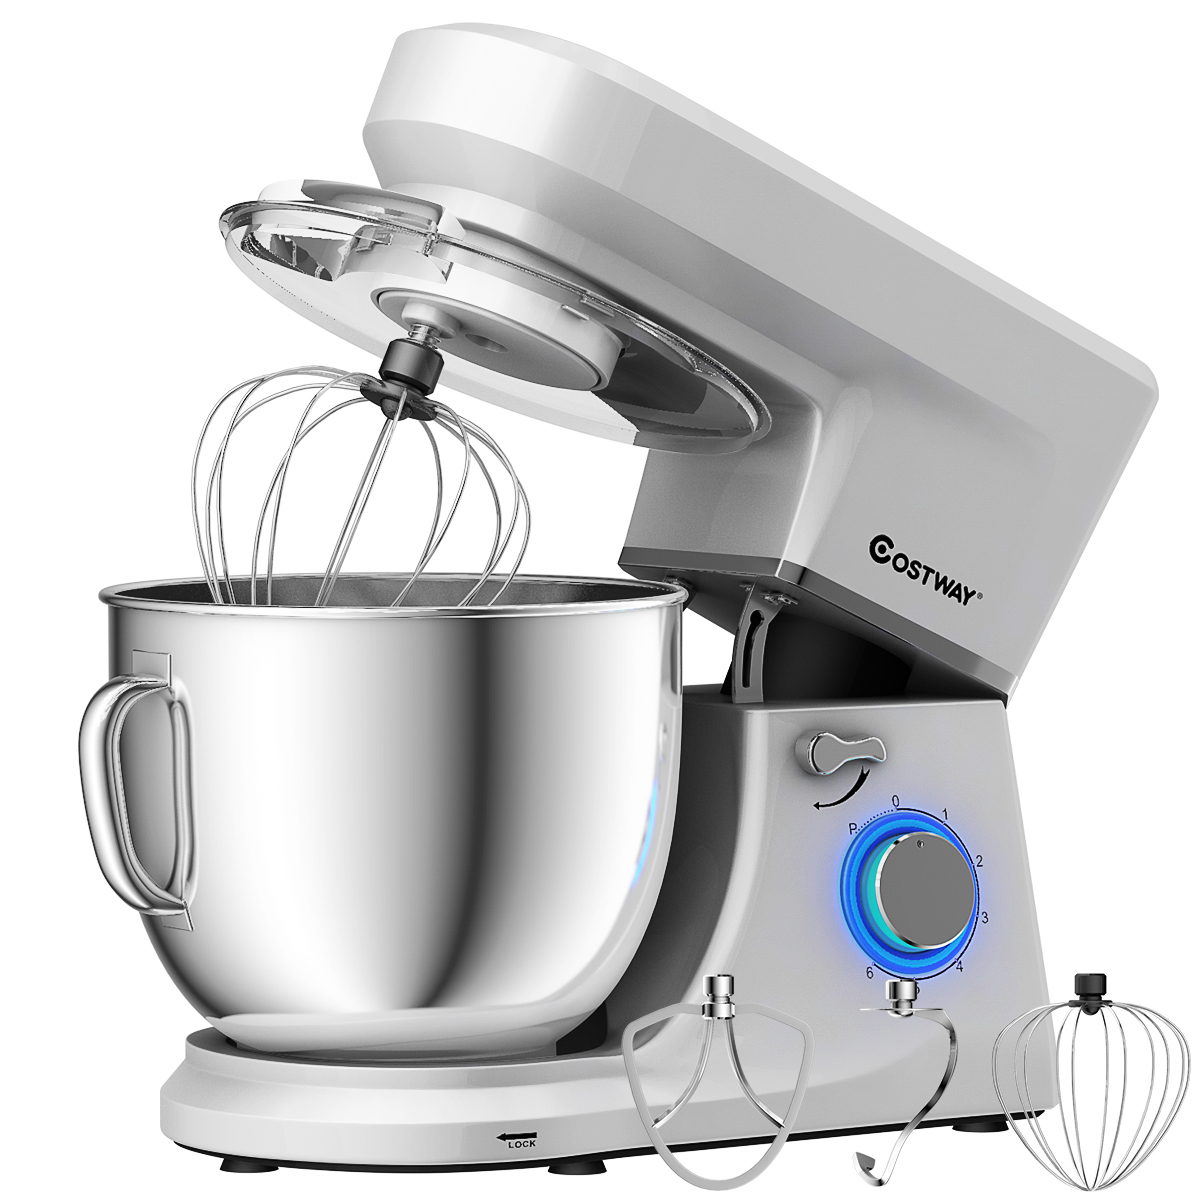 Costway Tilt-Head Stand Mixer 7.5 Qt 6 Speed 660W with Dough Hook, Whisk & Beater Silver - image 1 of 10